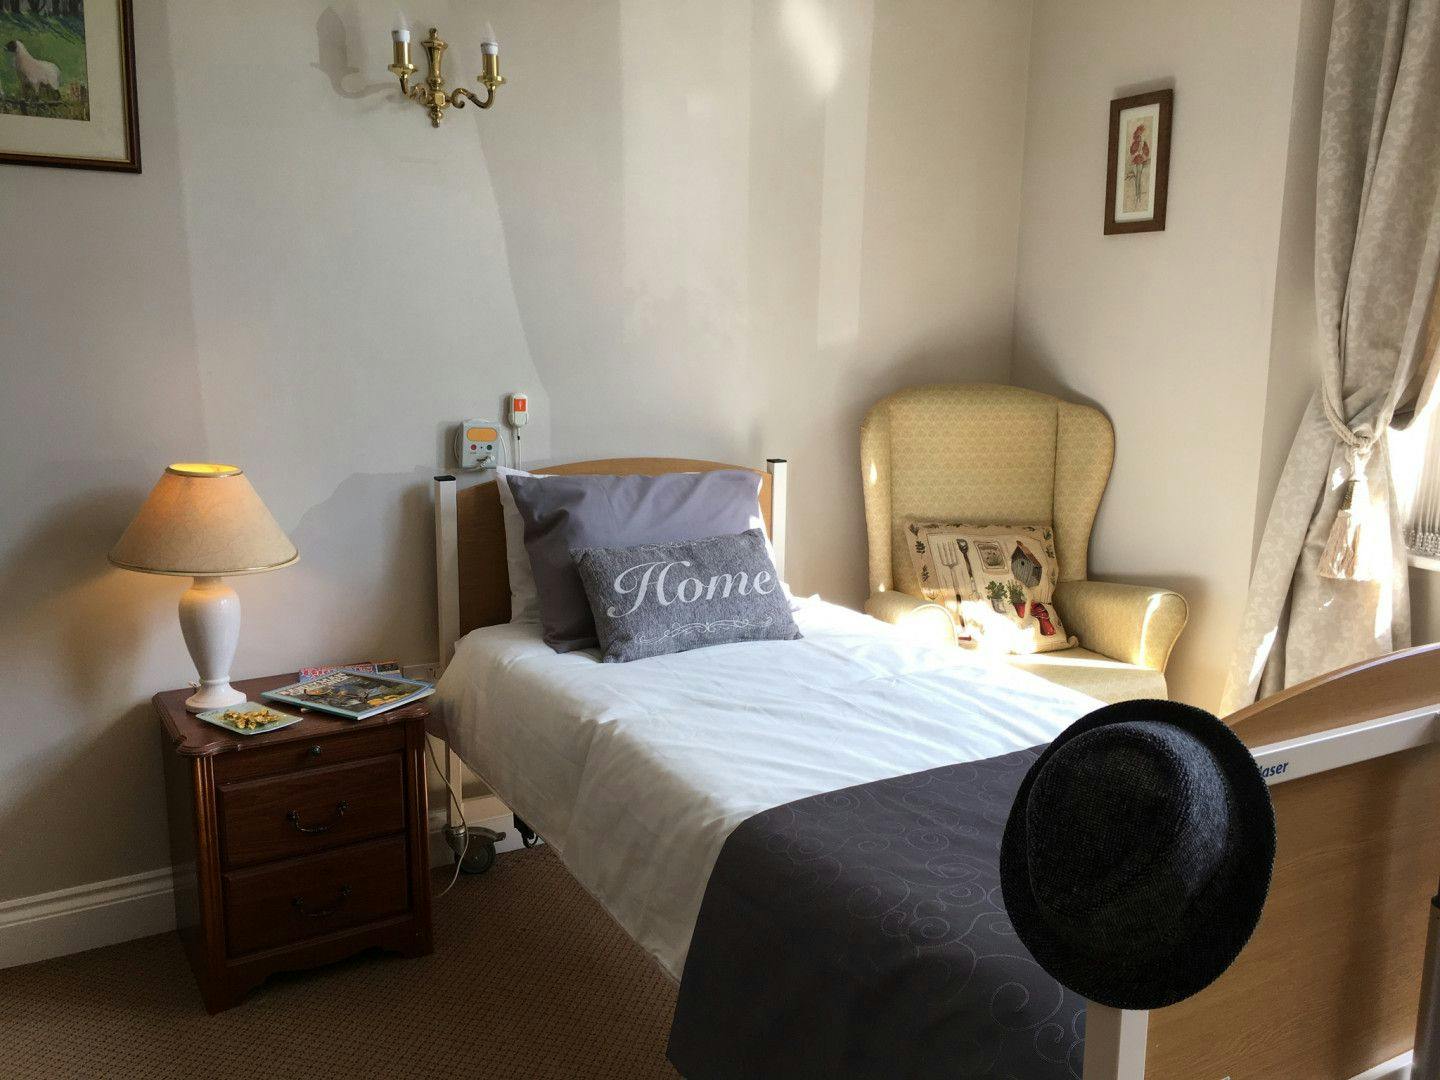 Bedroom of Kings Court care home in Barnard Castle, County Durham